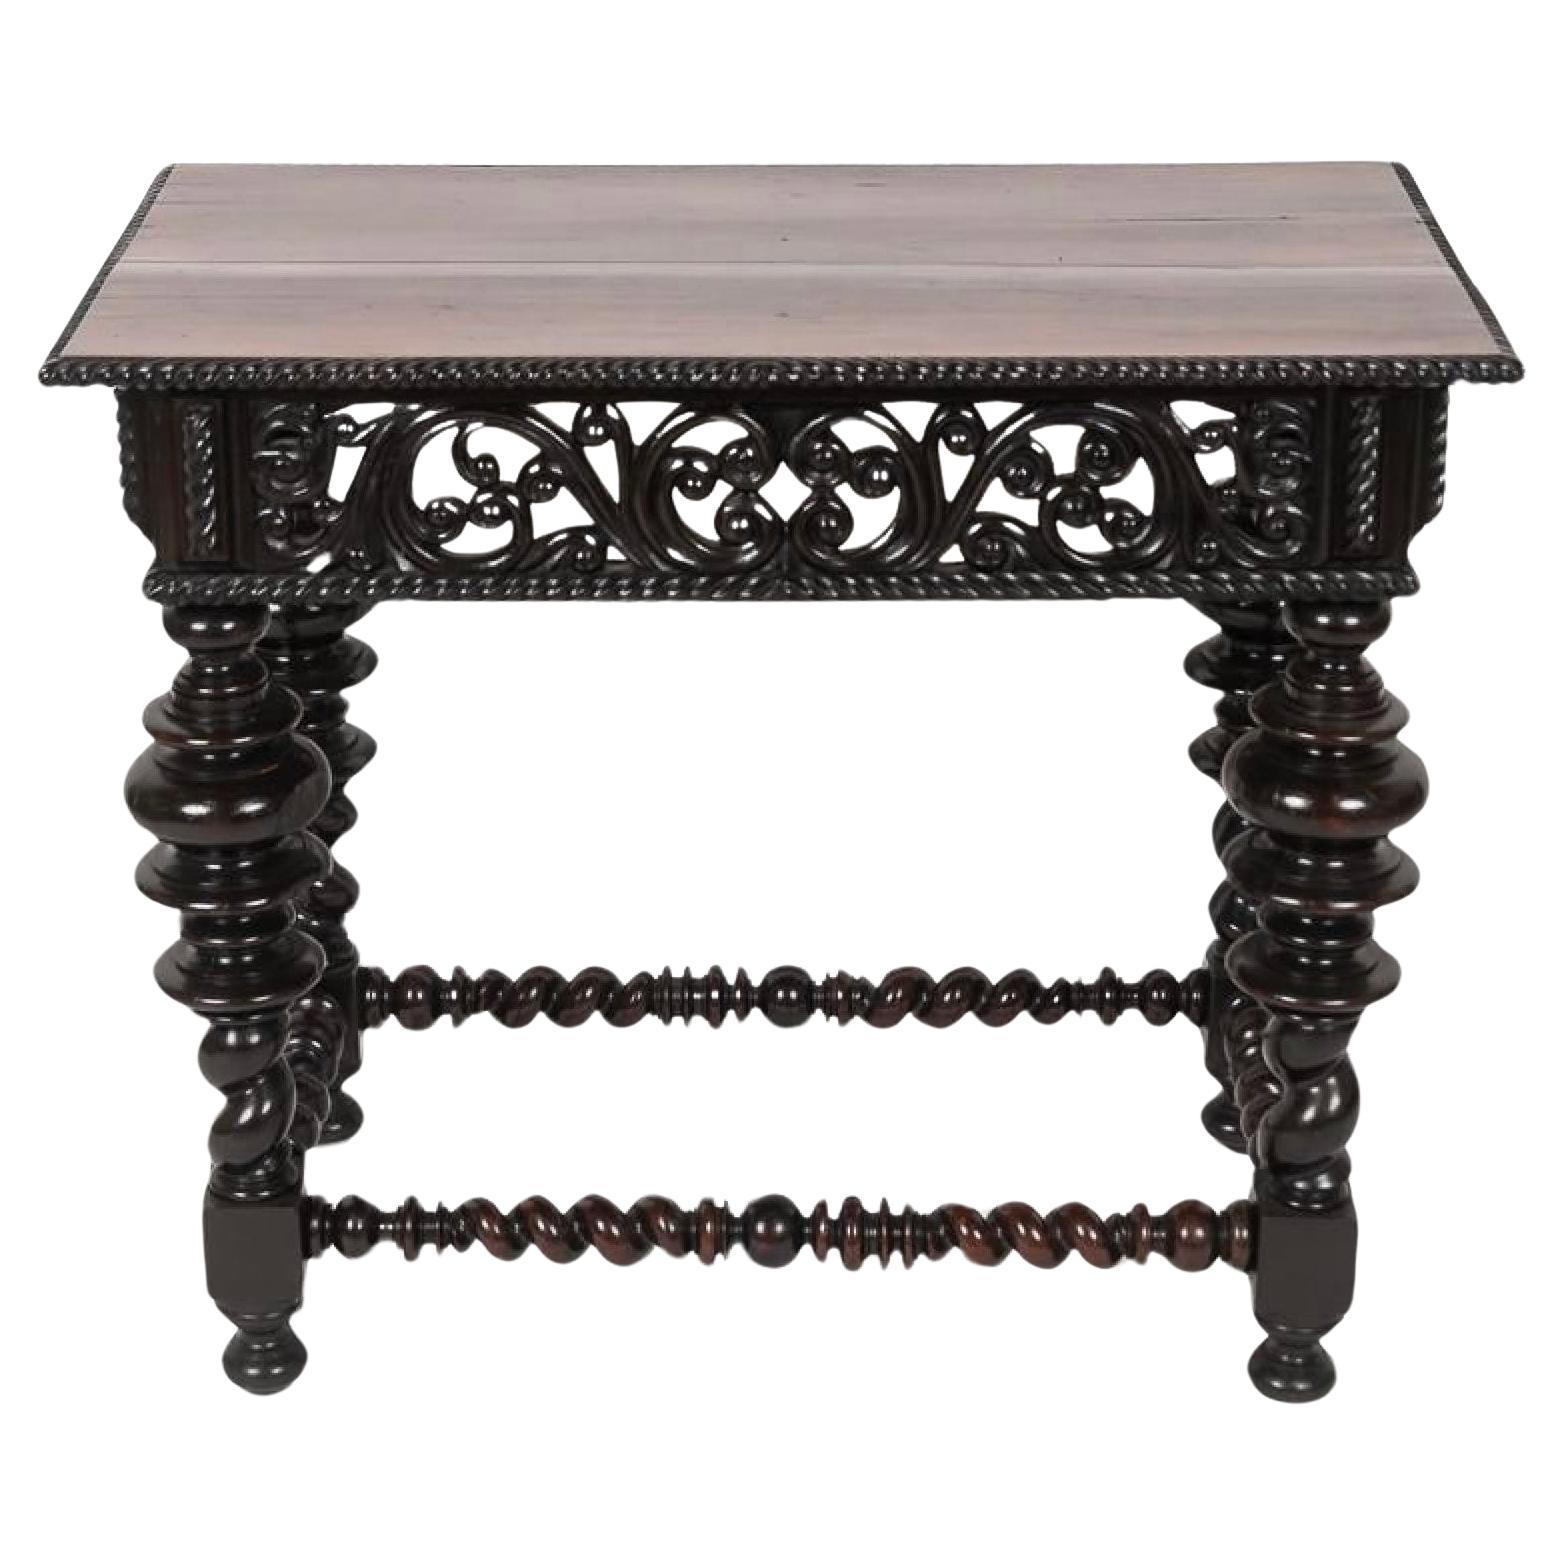 Antique Portuguese Carved Rosewood Side Table With Bulbous Turnings Early 19th C For Sale